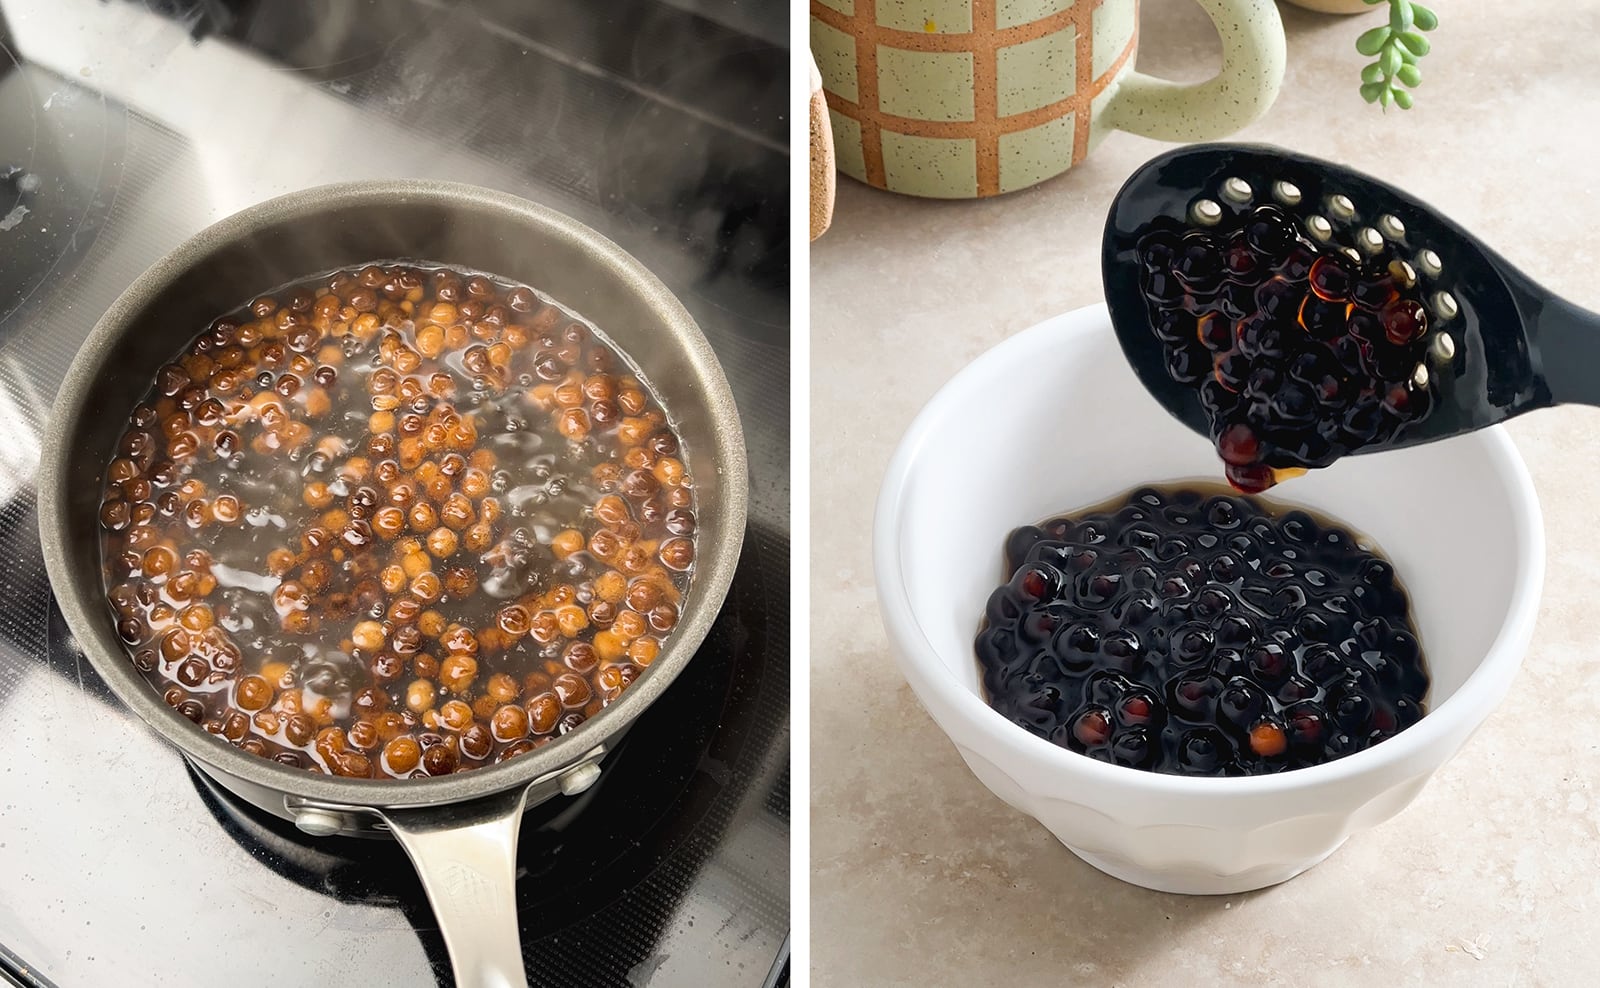 Left to right: cooking tapioca pearls in a pot of water, adding drained tapioca pearls to a bowl.